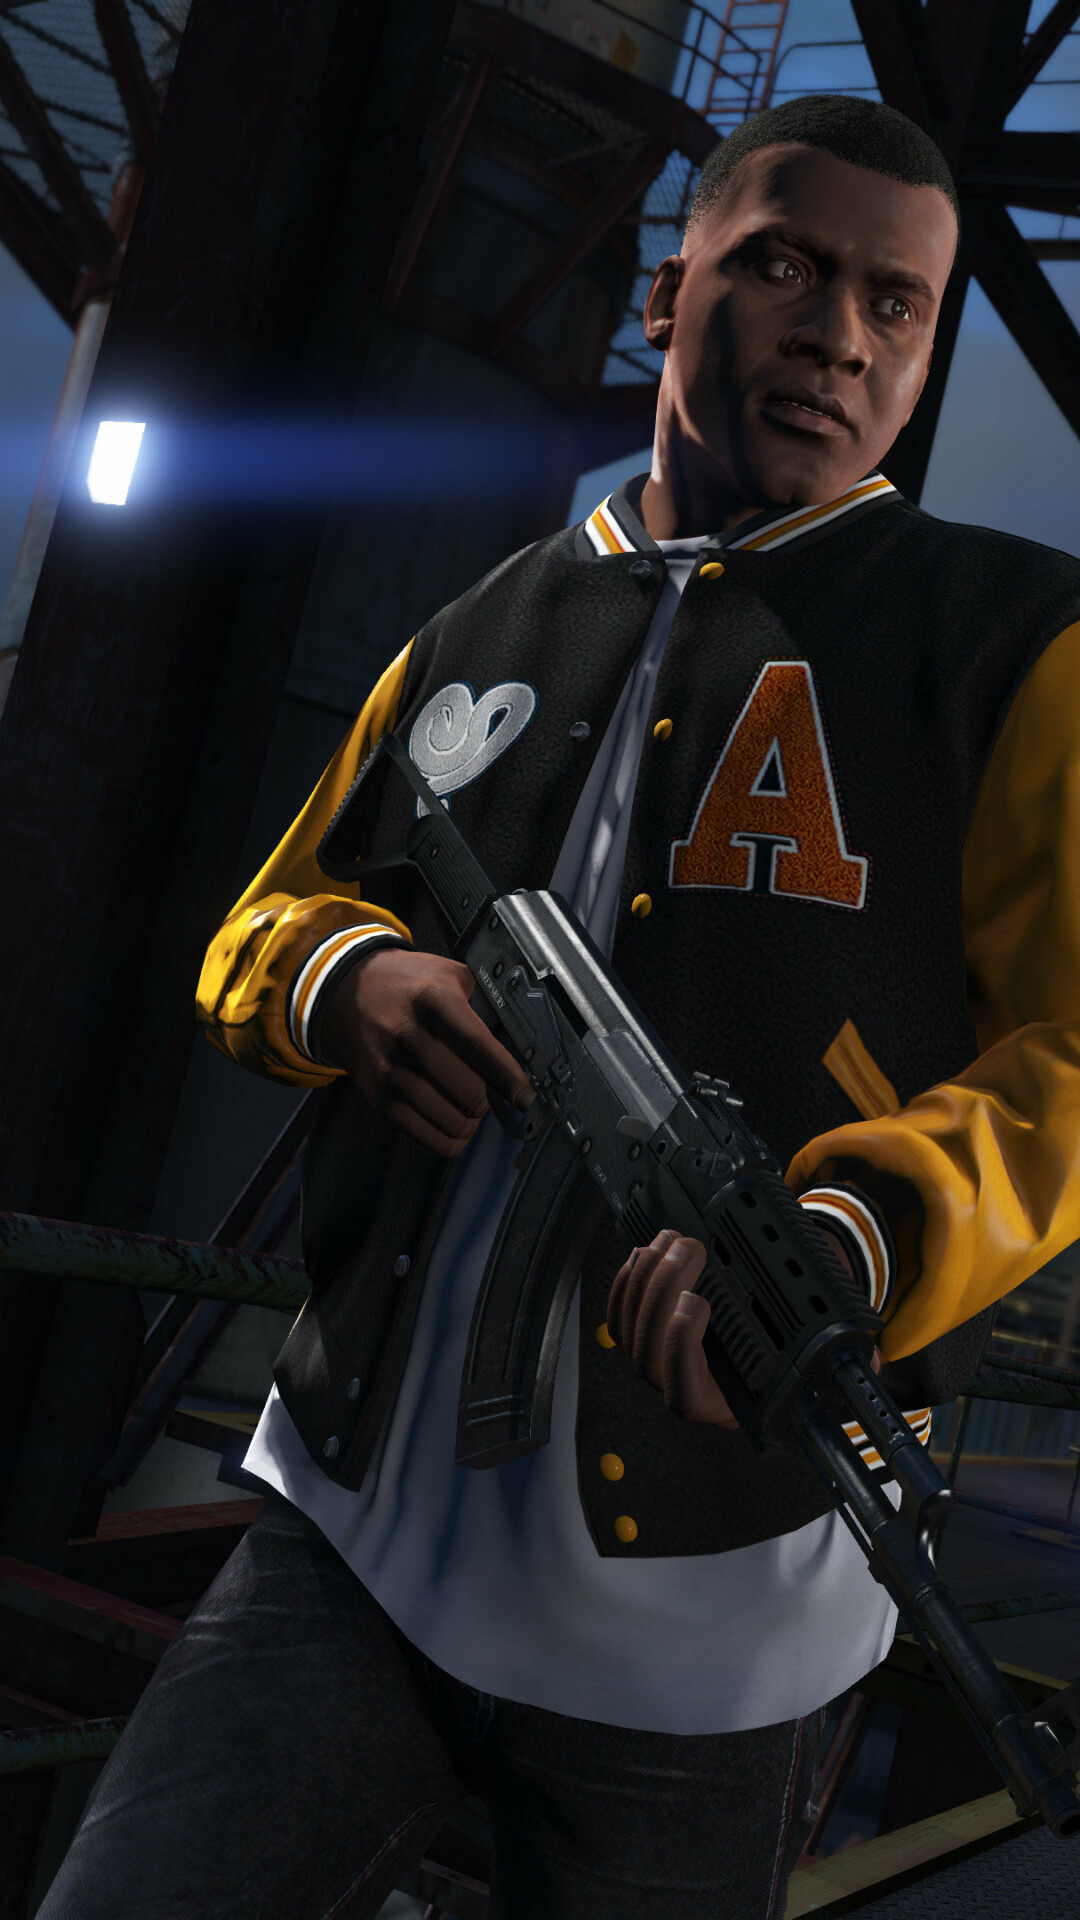 Grand Theft Auto 5: Franklin Clinton, Voiced by Shawn Fonteno. 1080x1920 Full HD Background.